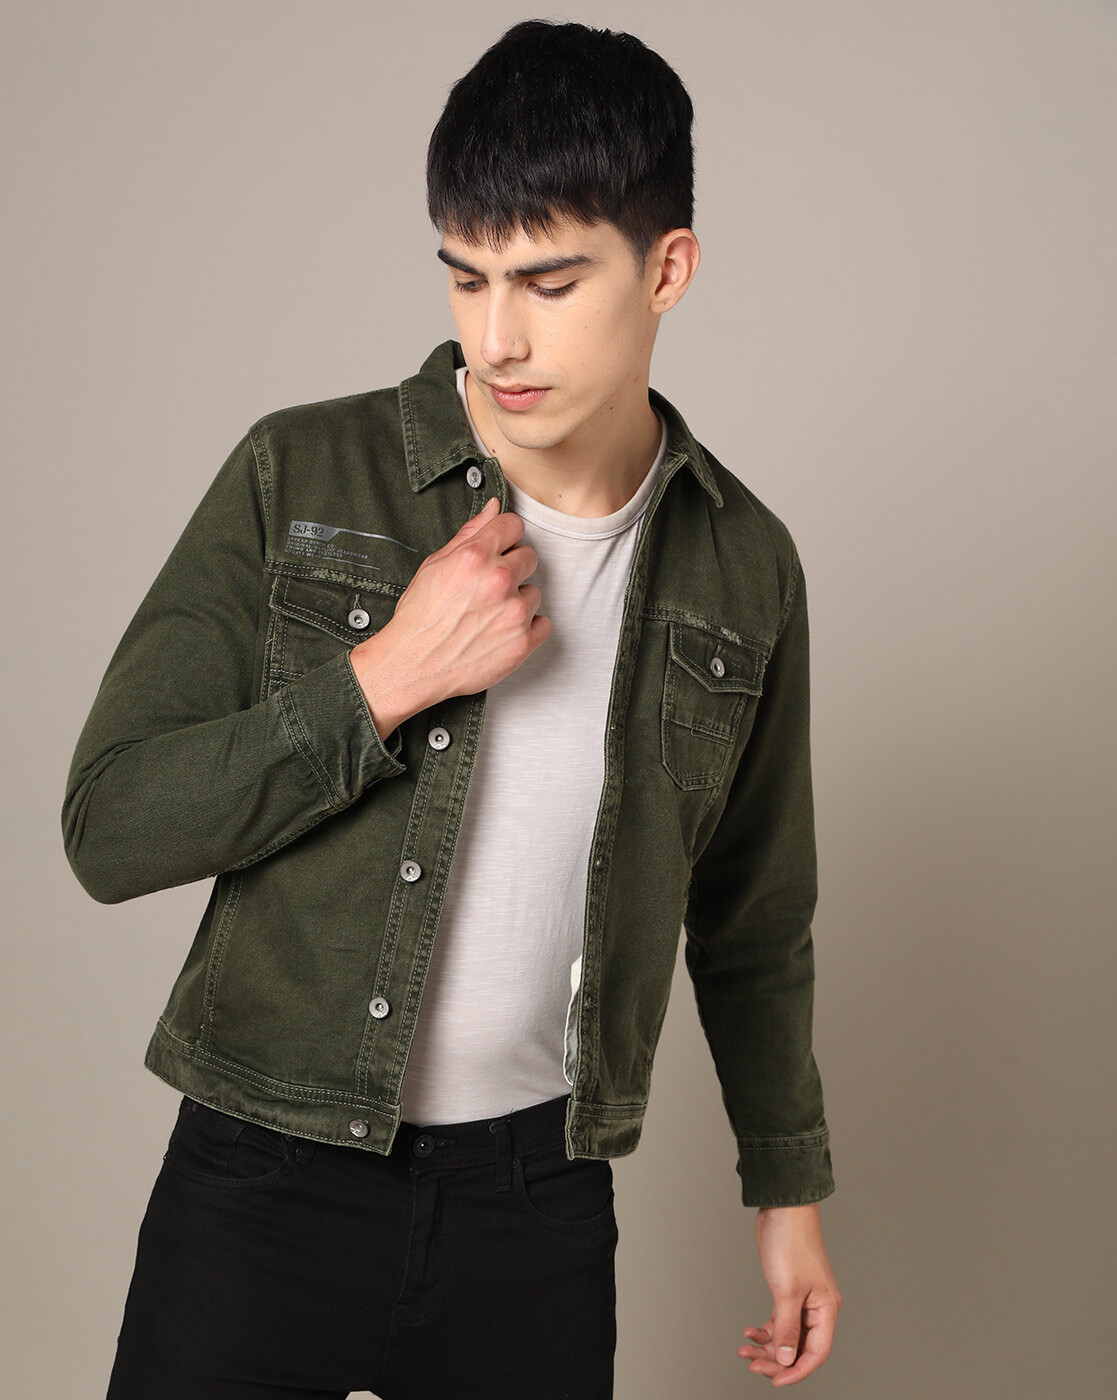 Mens Slim Fit Army Green Best Jean Jackets Mens For Spring And Autumn  Streetwear Denim Jacket With Hip Hop Bomber Style Style 201128 From Cong02,  $24.86 | DHgate.Com